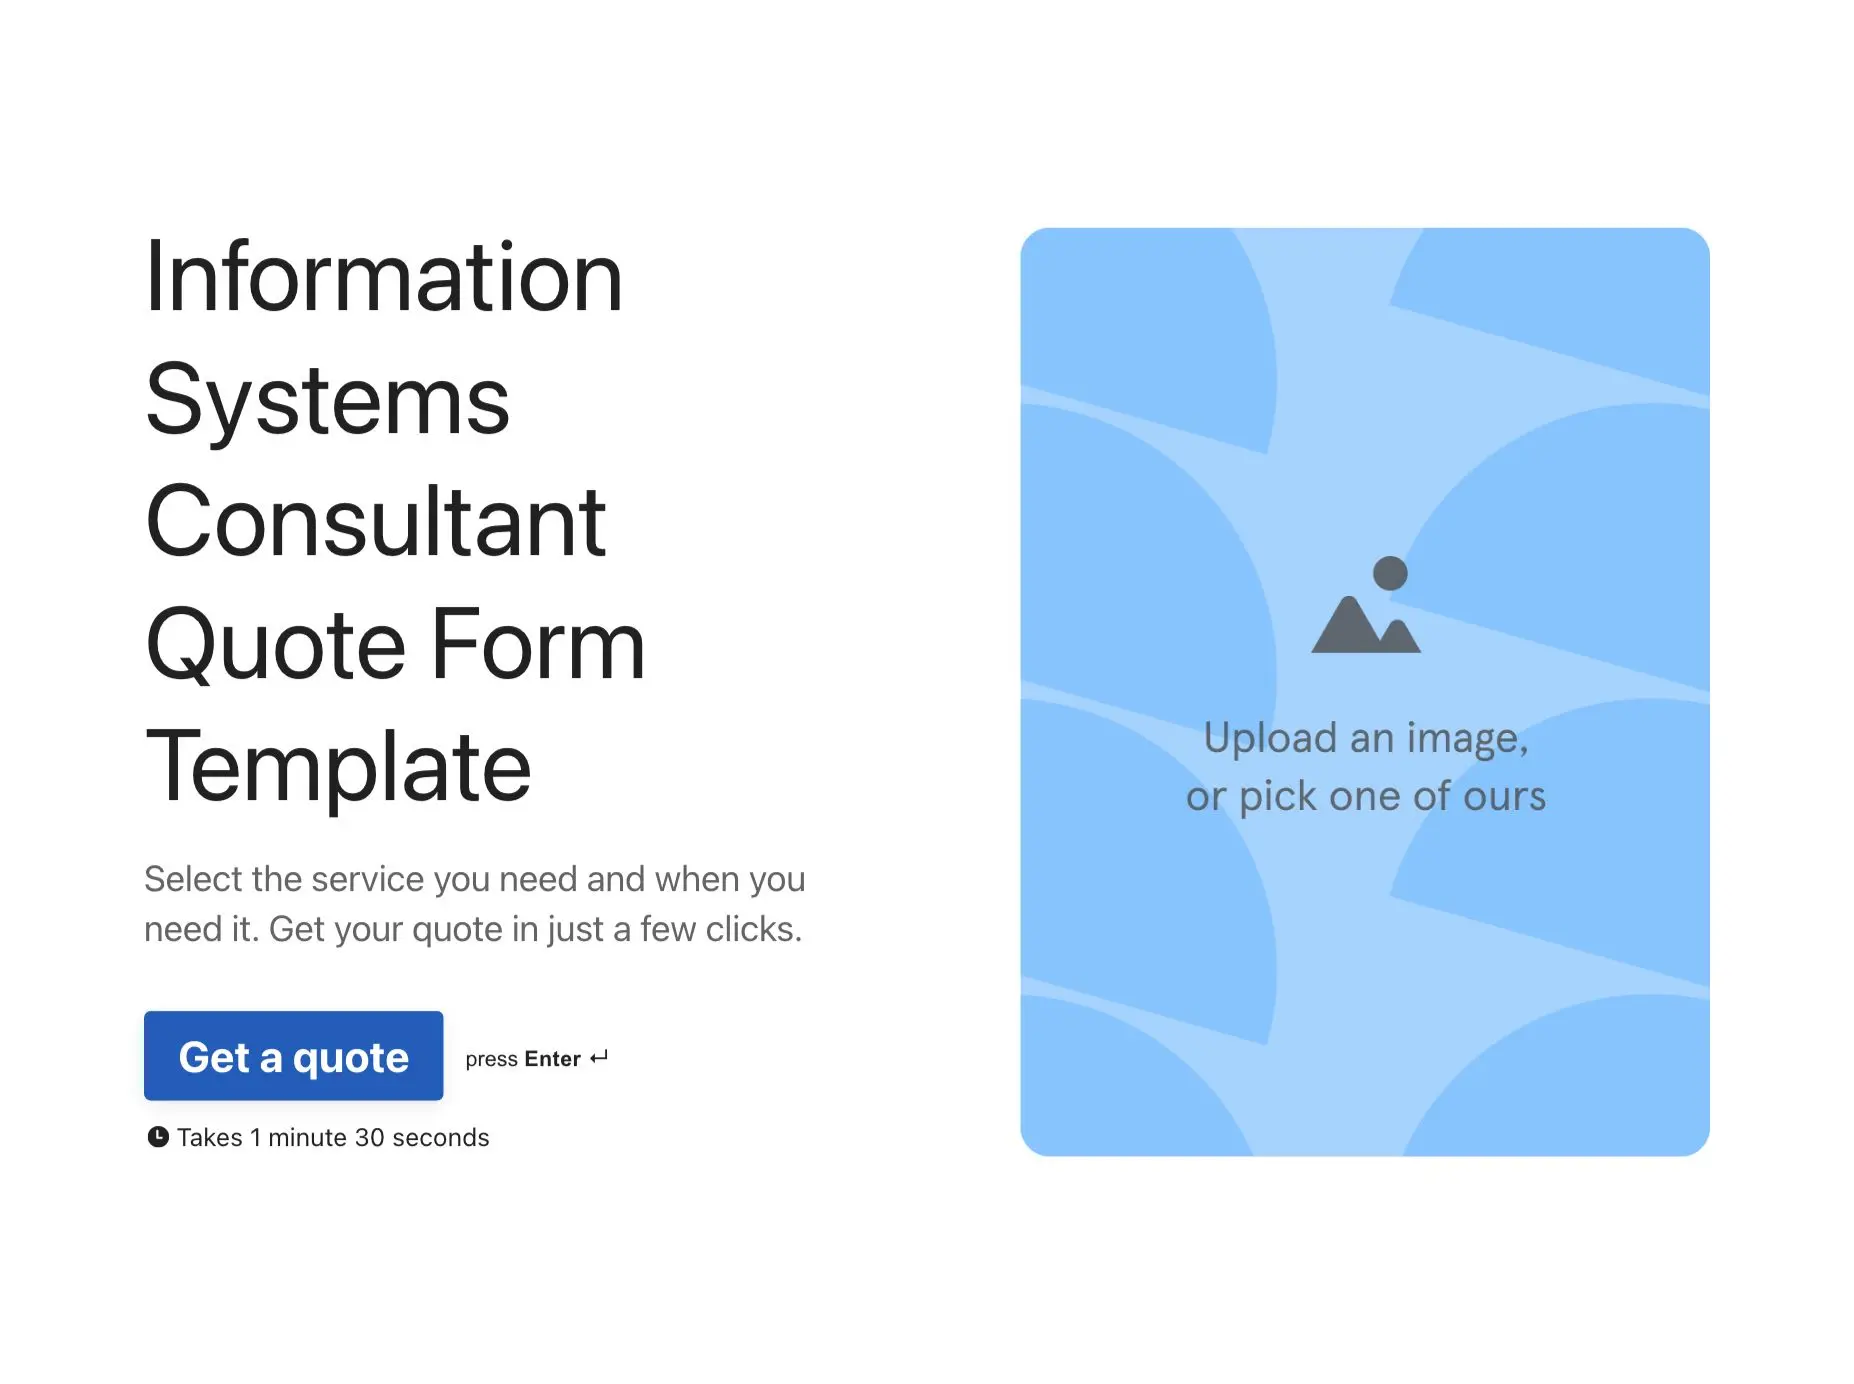 Information Systems Consultant Quote Form Template Hero